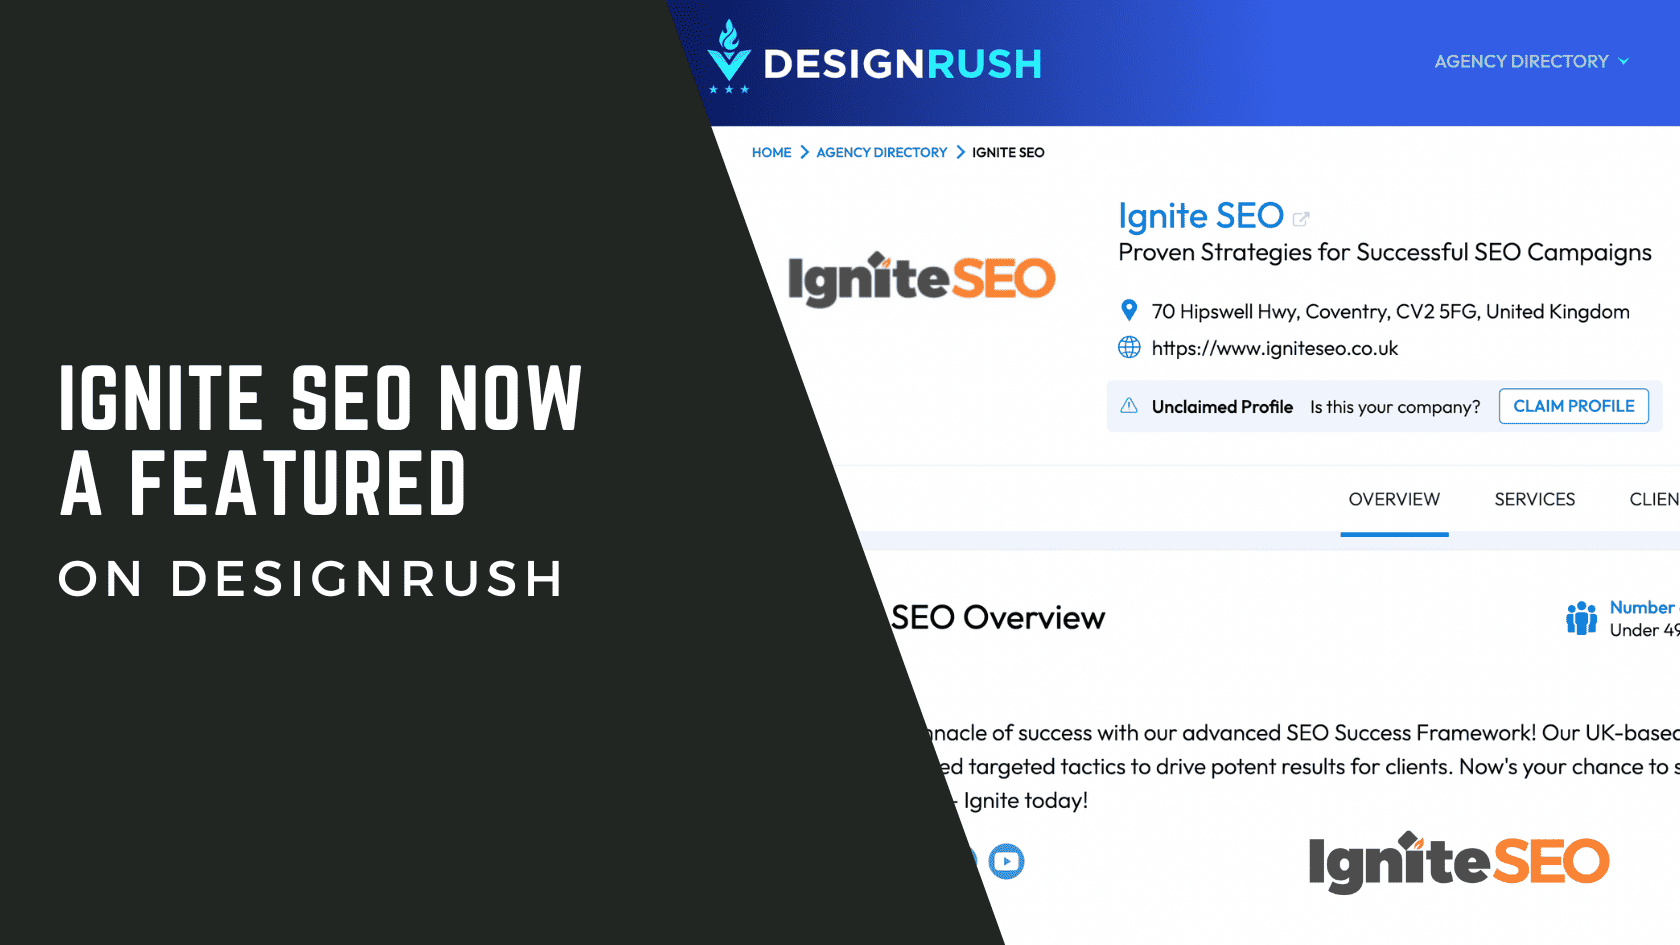 Ignite SEO Now a Featured Agency on DesignRush